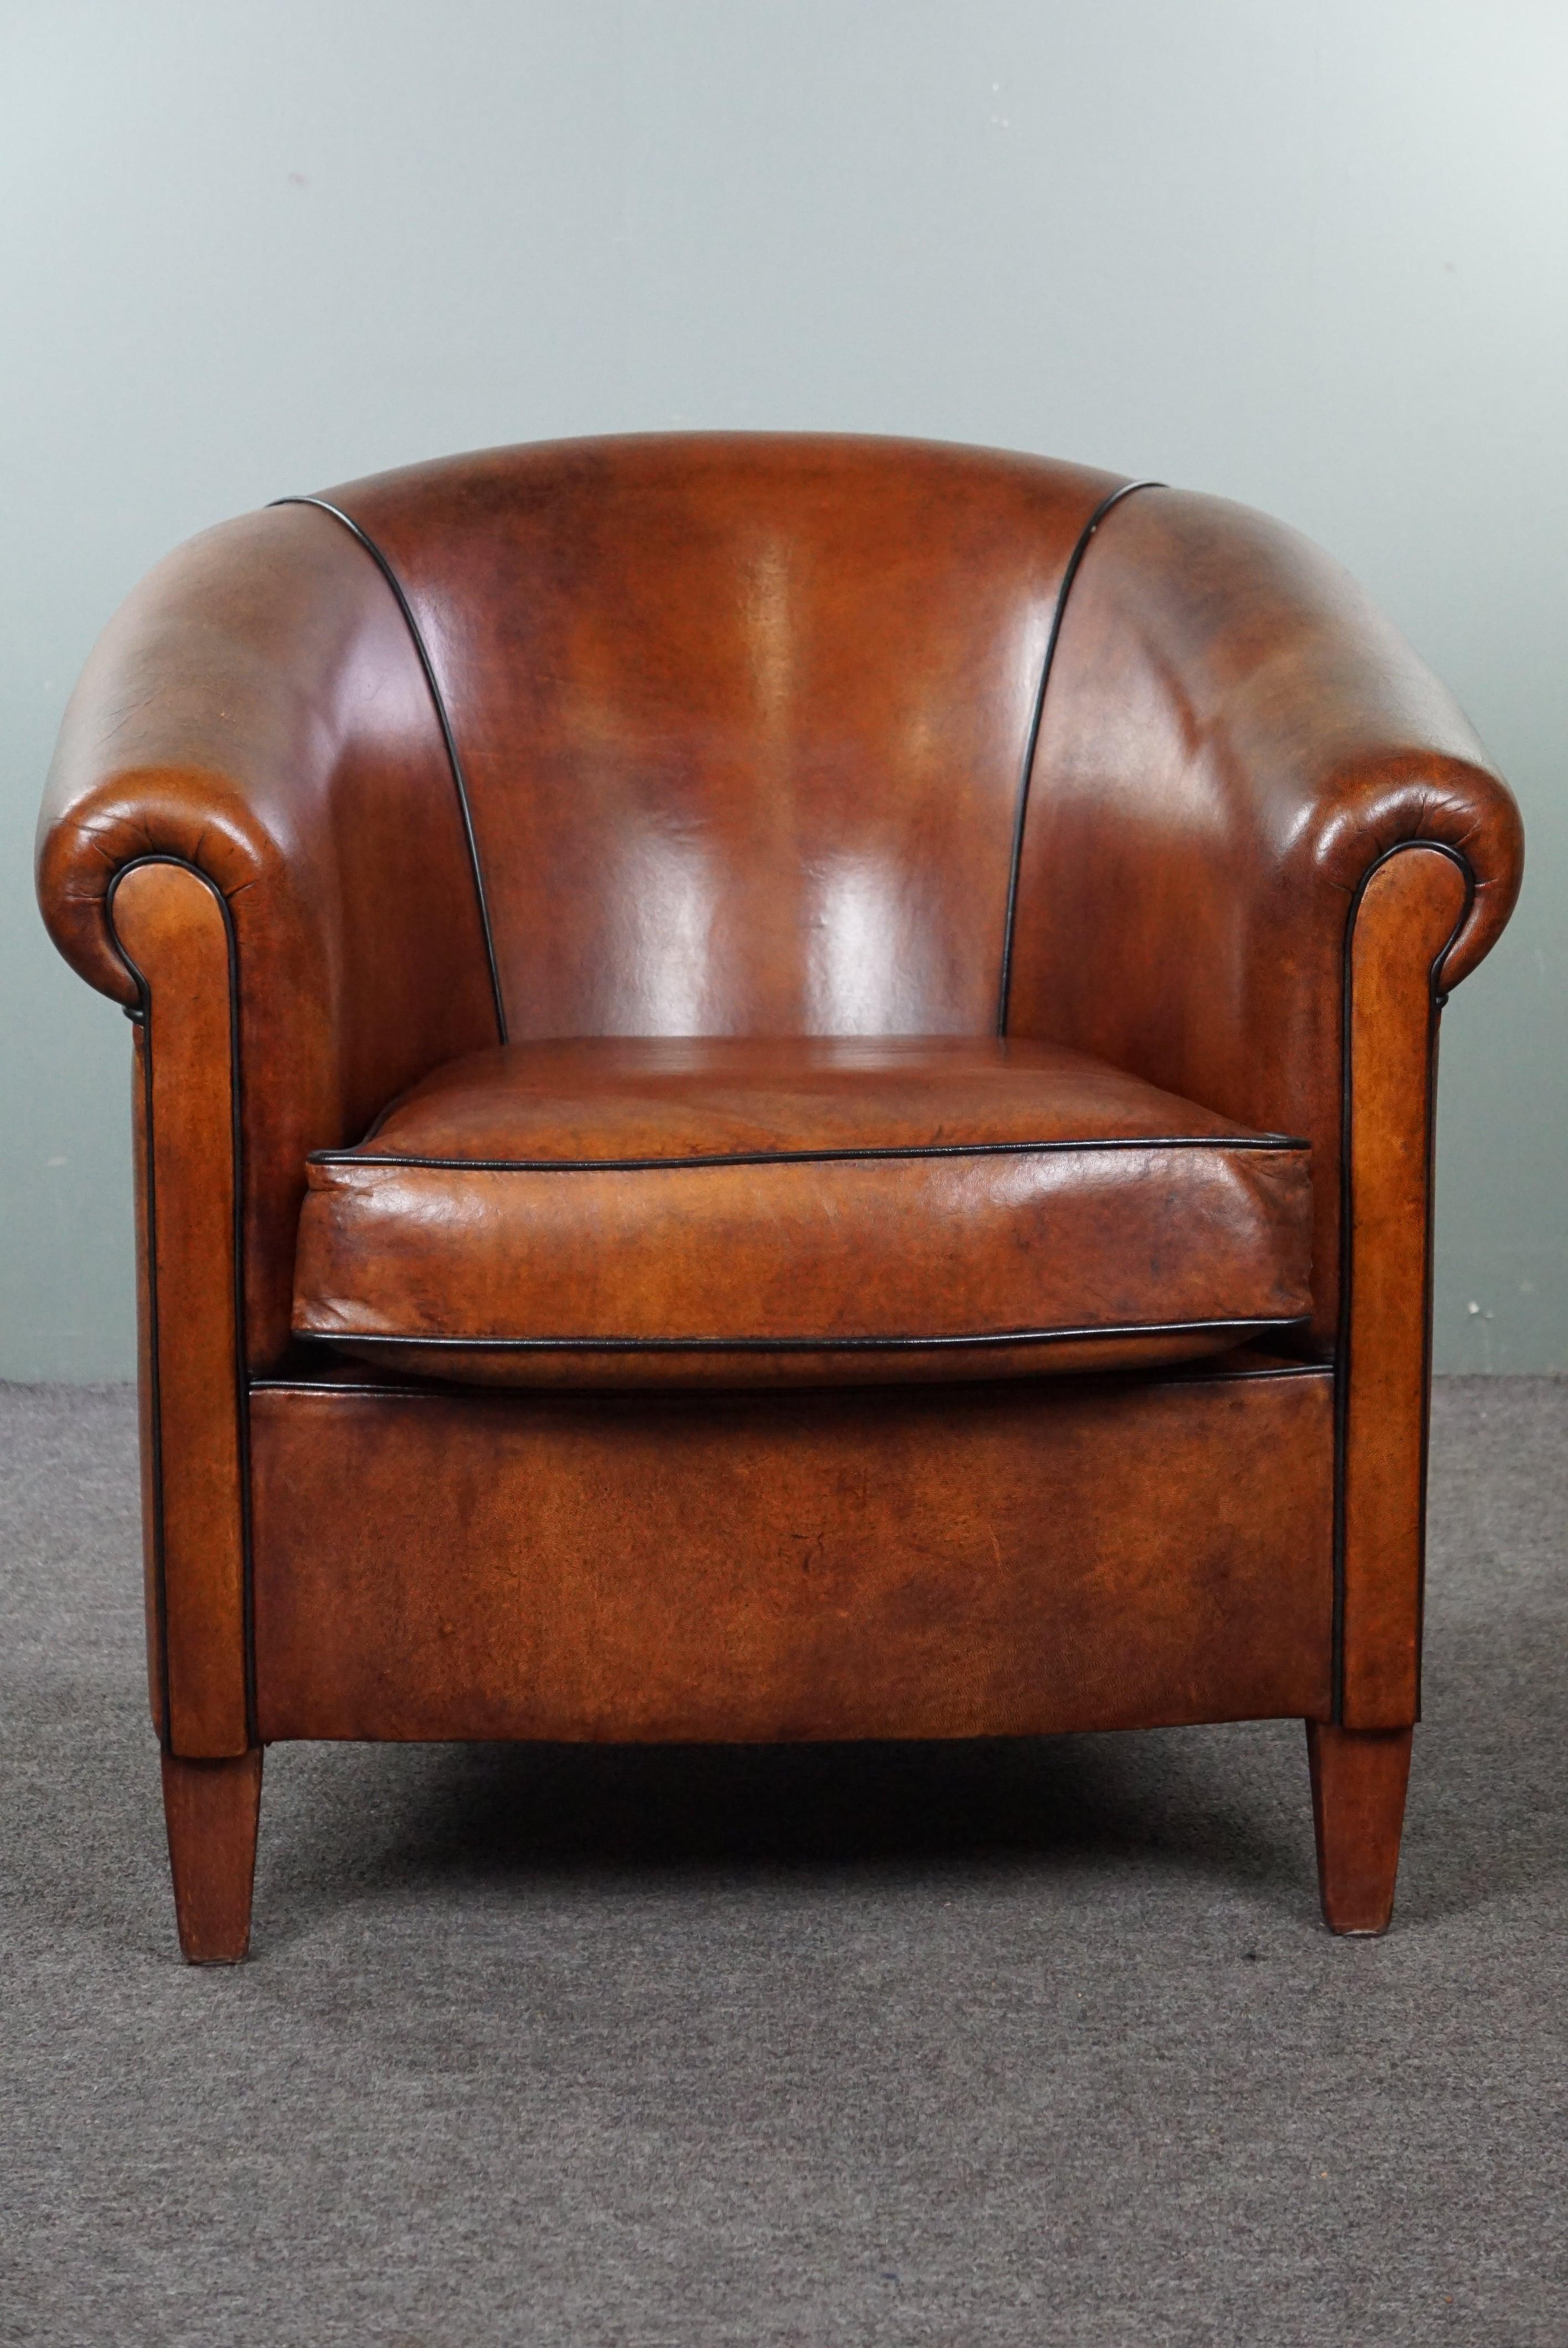 Offered is this beautiful, nearly new sheep leather club armchair with black piping. We consider a sheep leather club armchair to be the foundation of a timeless and sophisticated interior. While some individuals find an aged club armchair